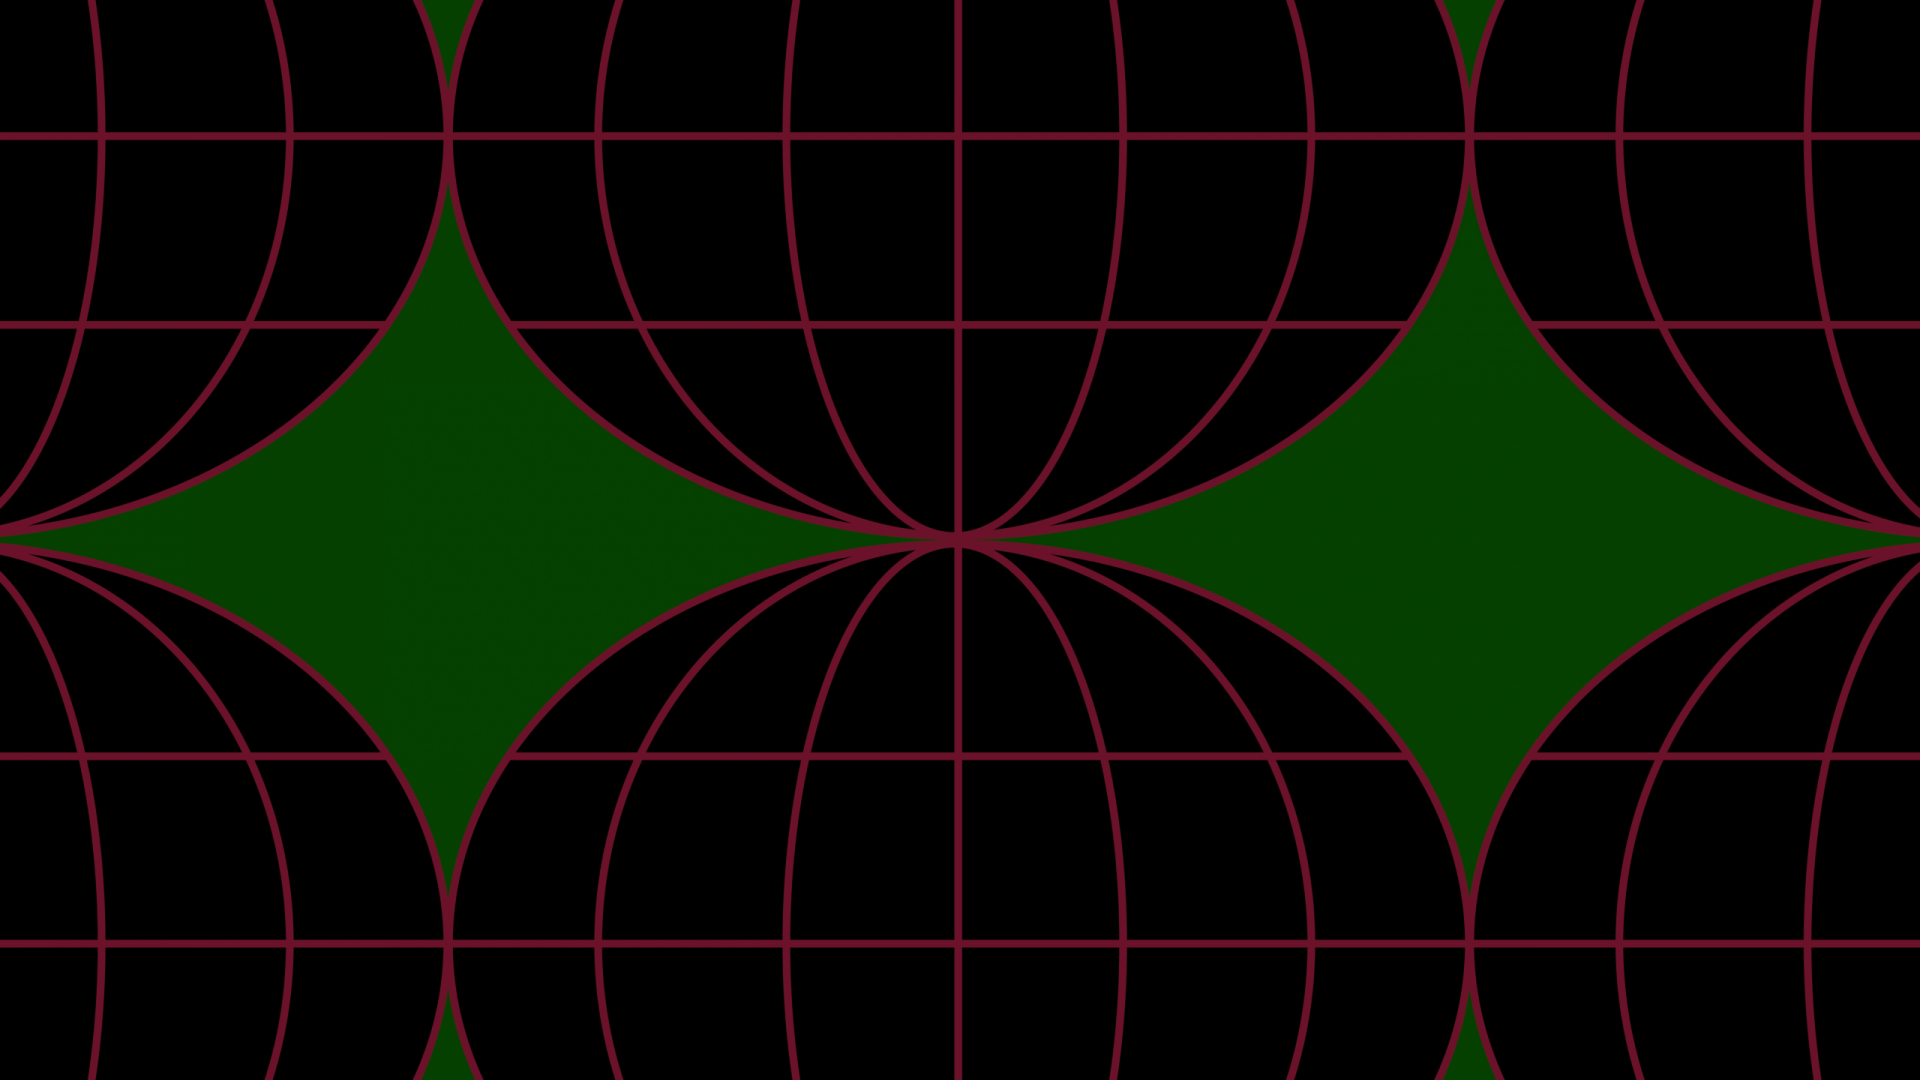 Illustration of black and red globes on a green background. These are organised in two rows and three columns with a tight cropping showing only half globes.